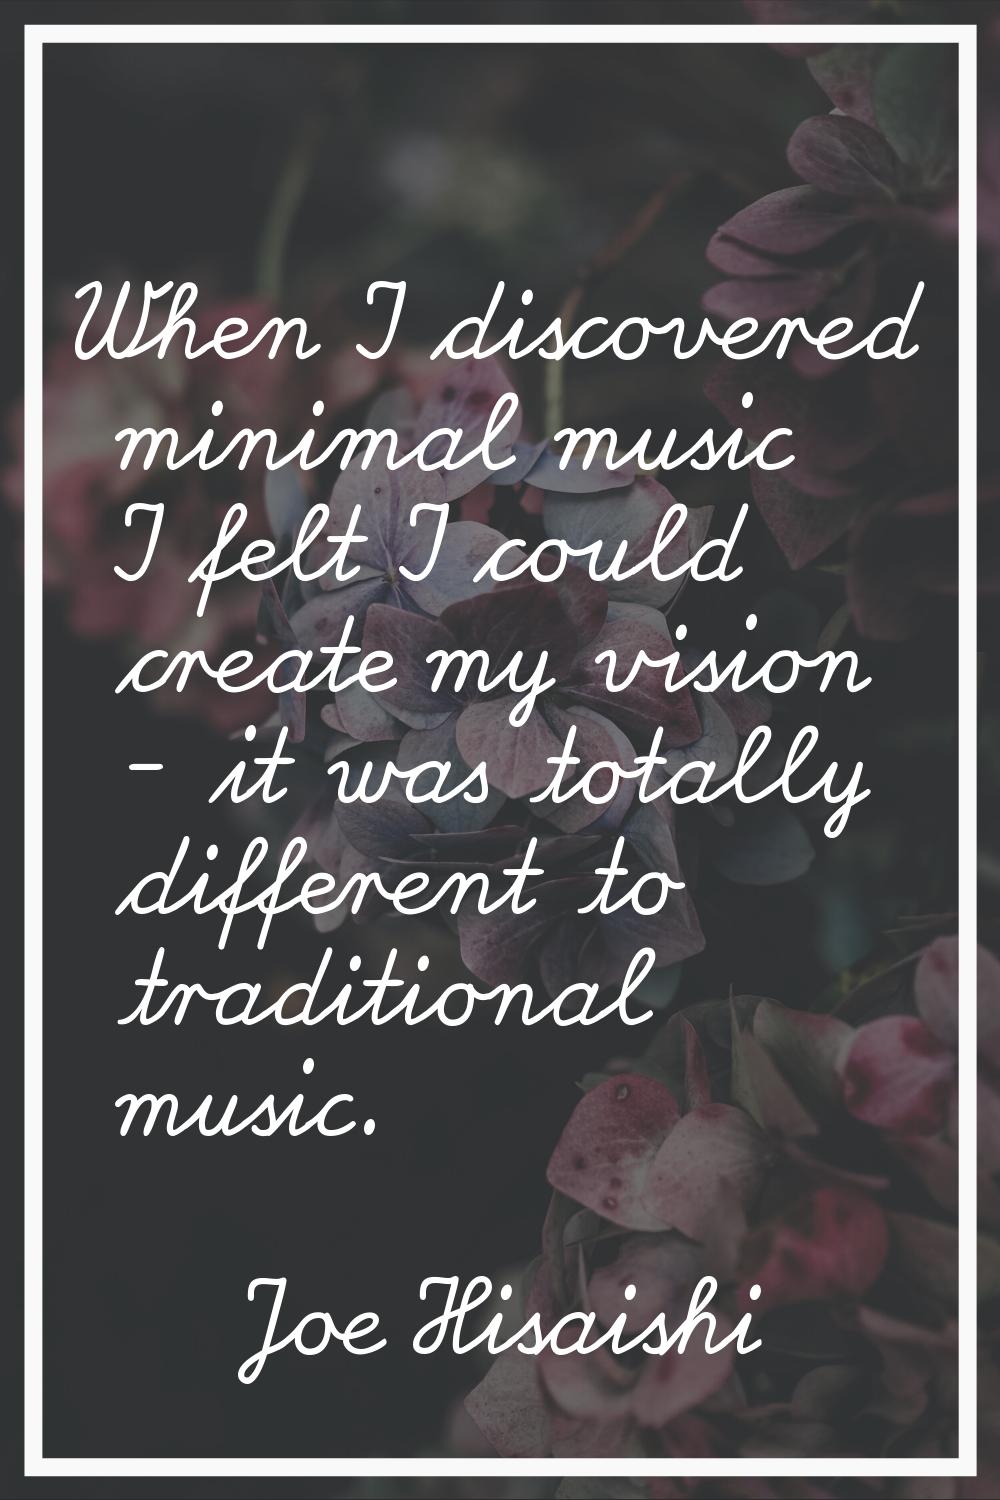 When I discovered minimal music I felt I could create my vision - it was totally different to tradi